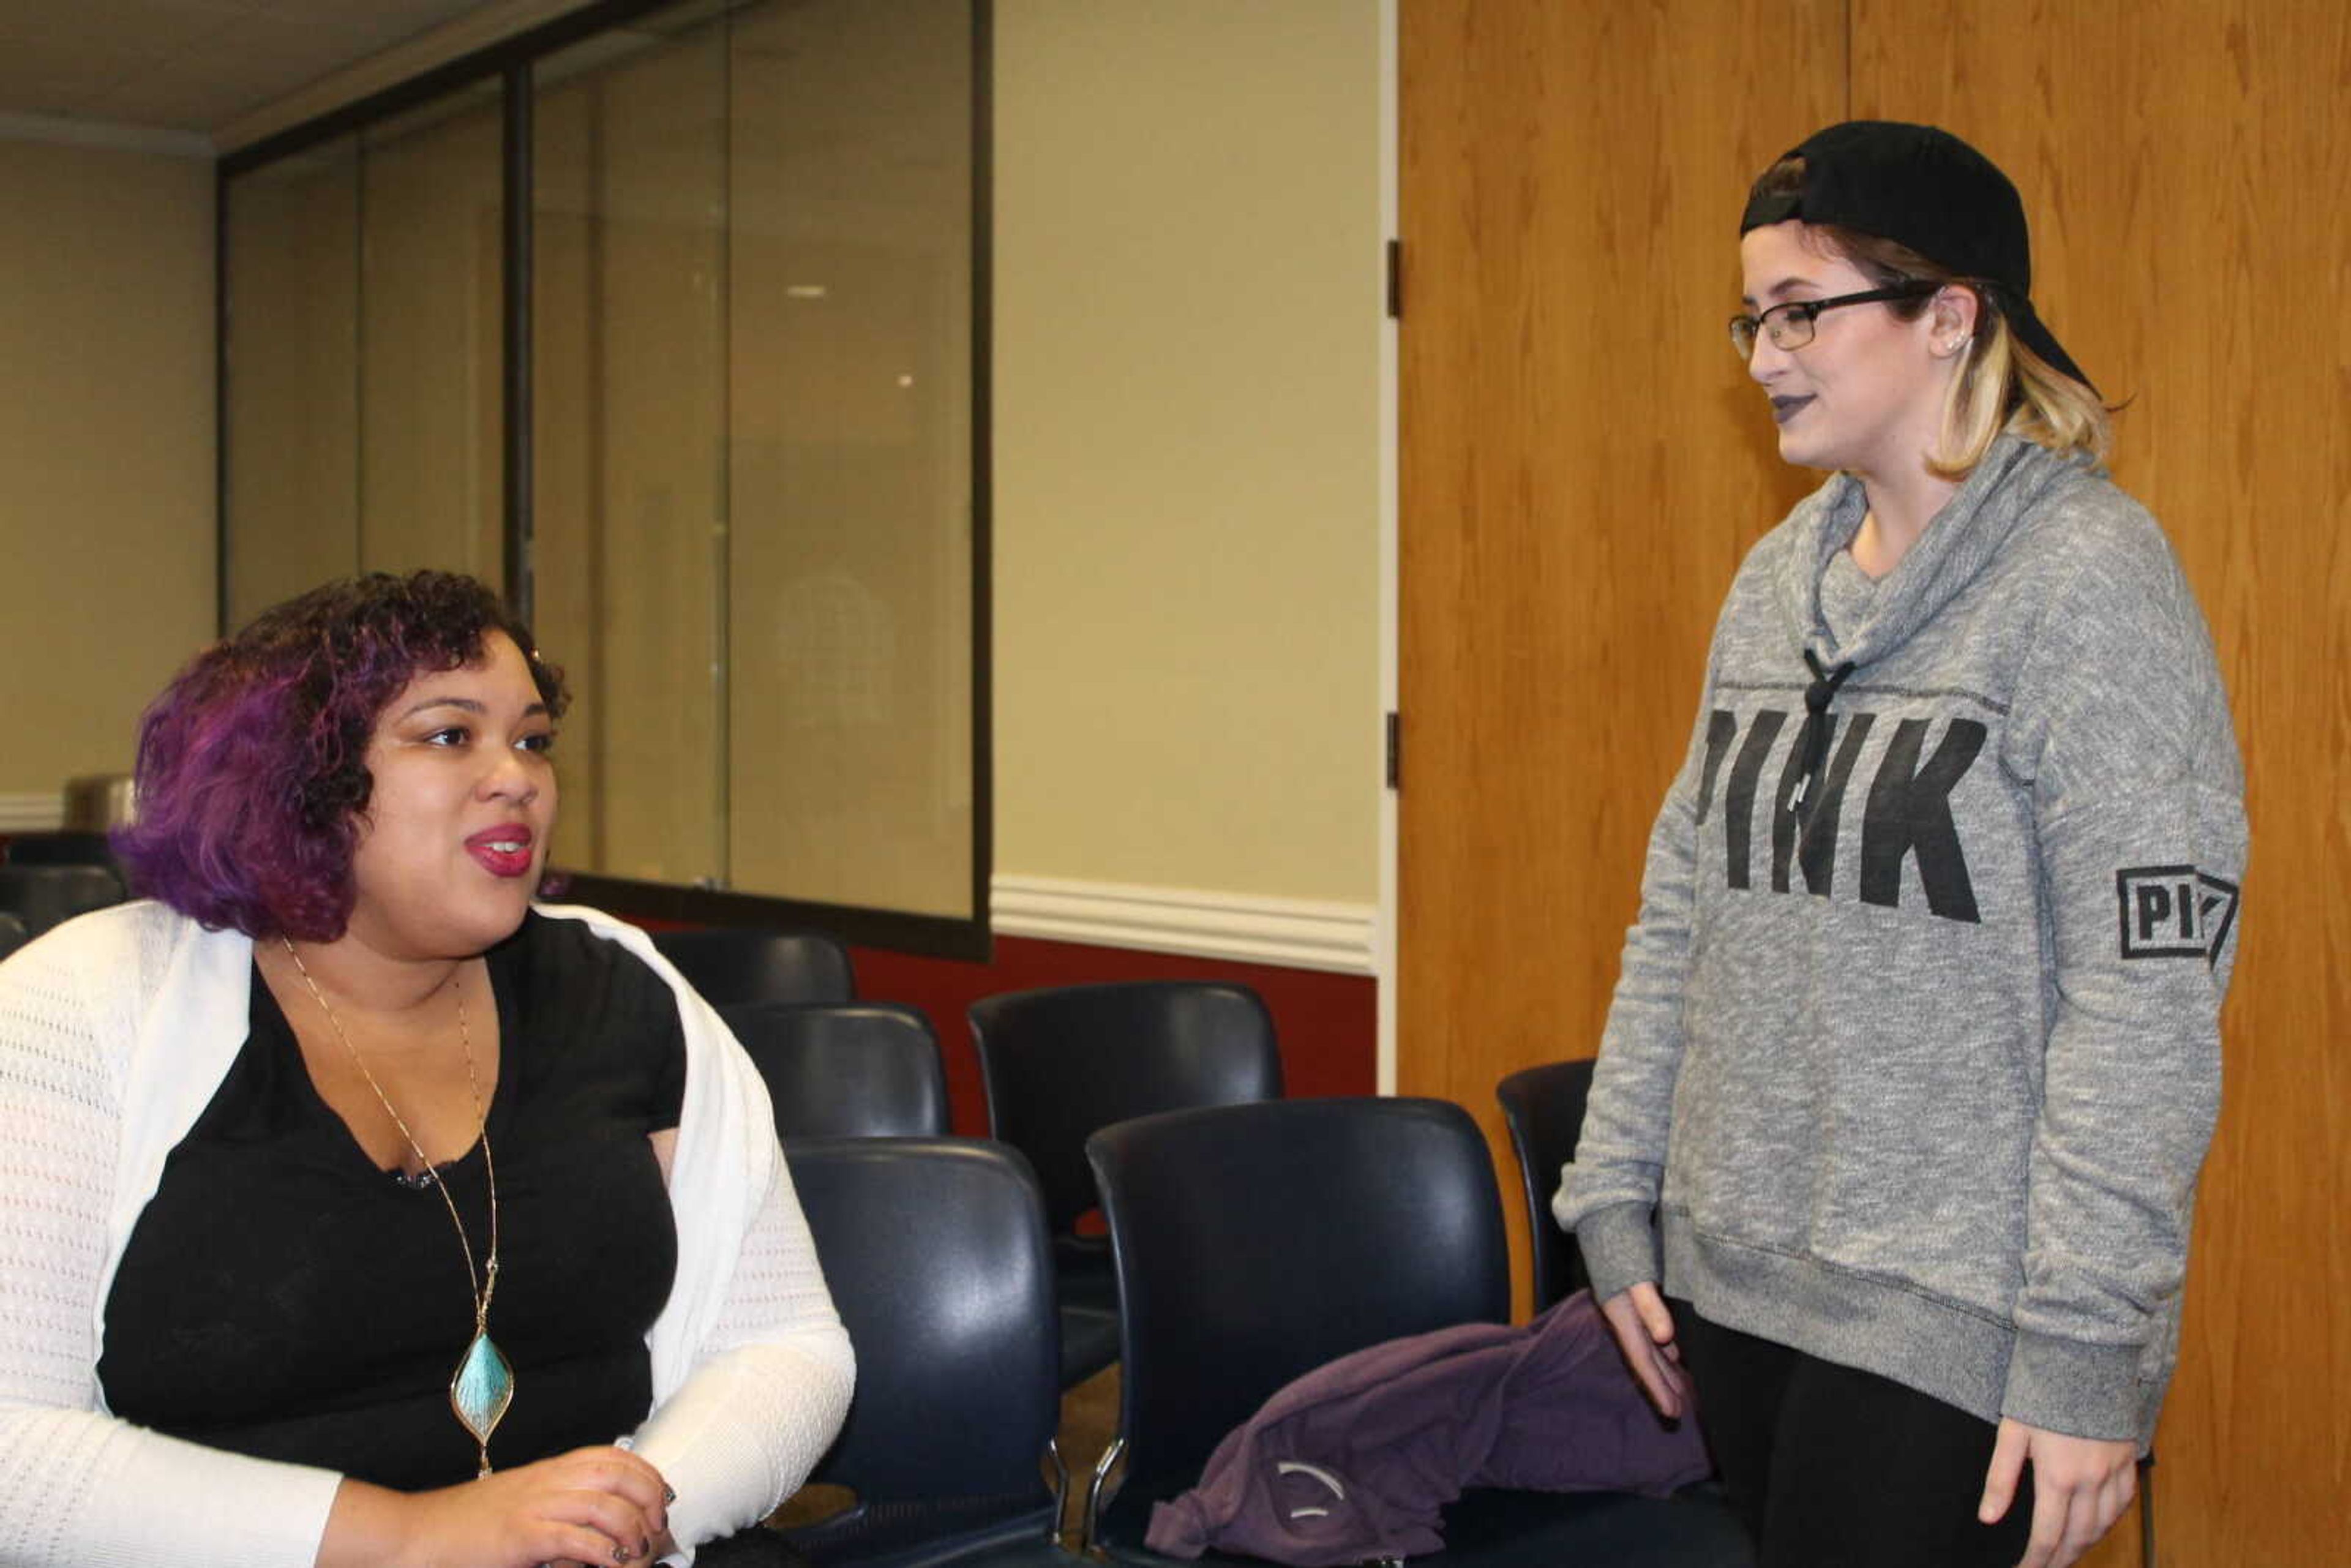 Danielle Evans speaking with student, Mary Jo Blunk, after the reading.